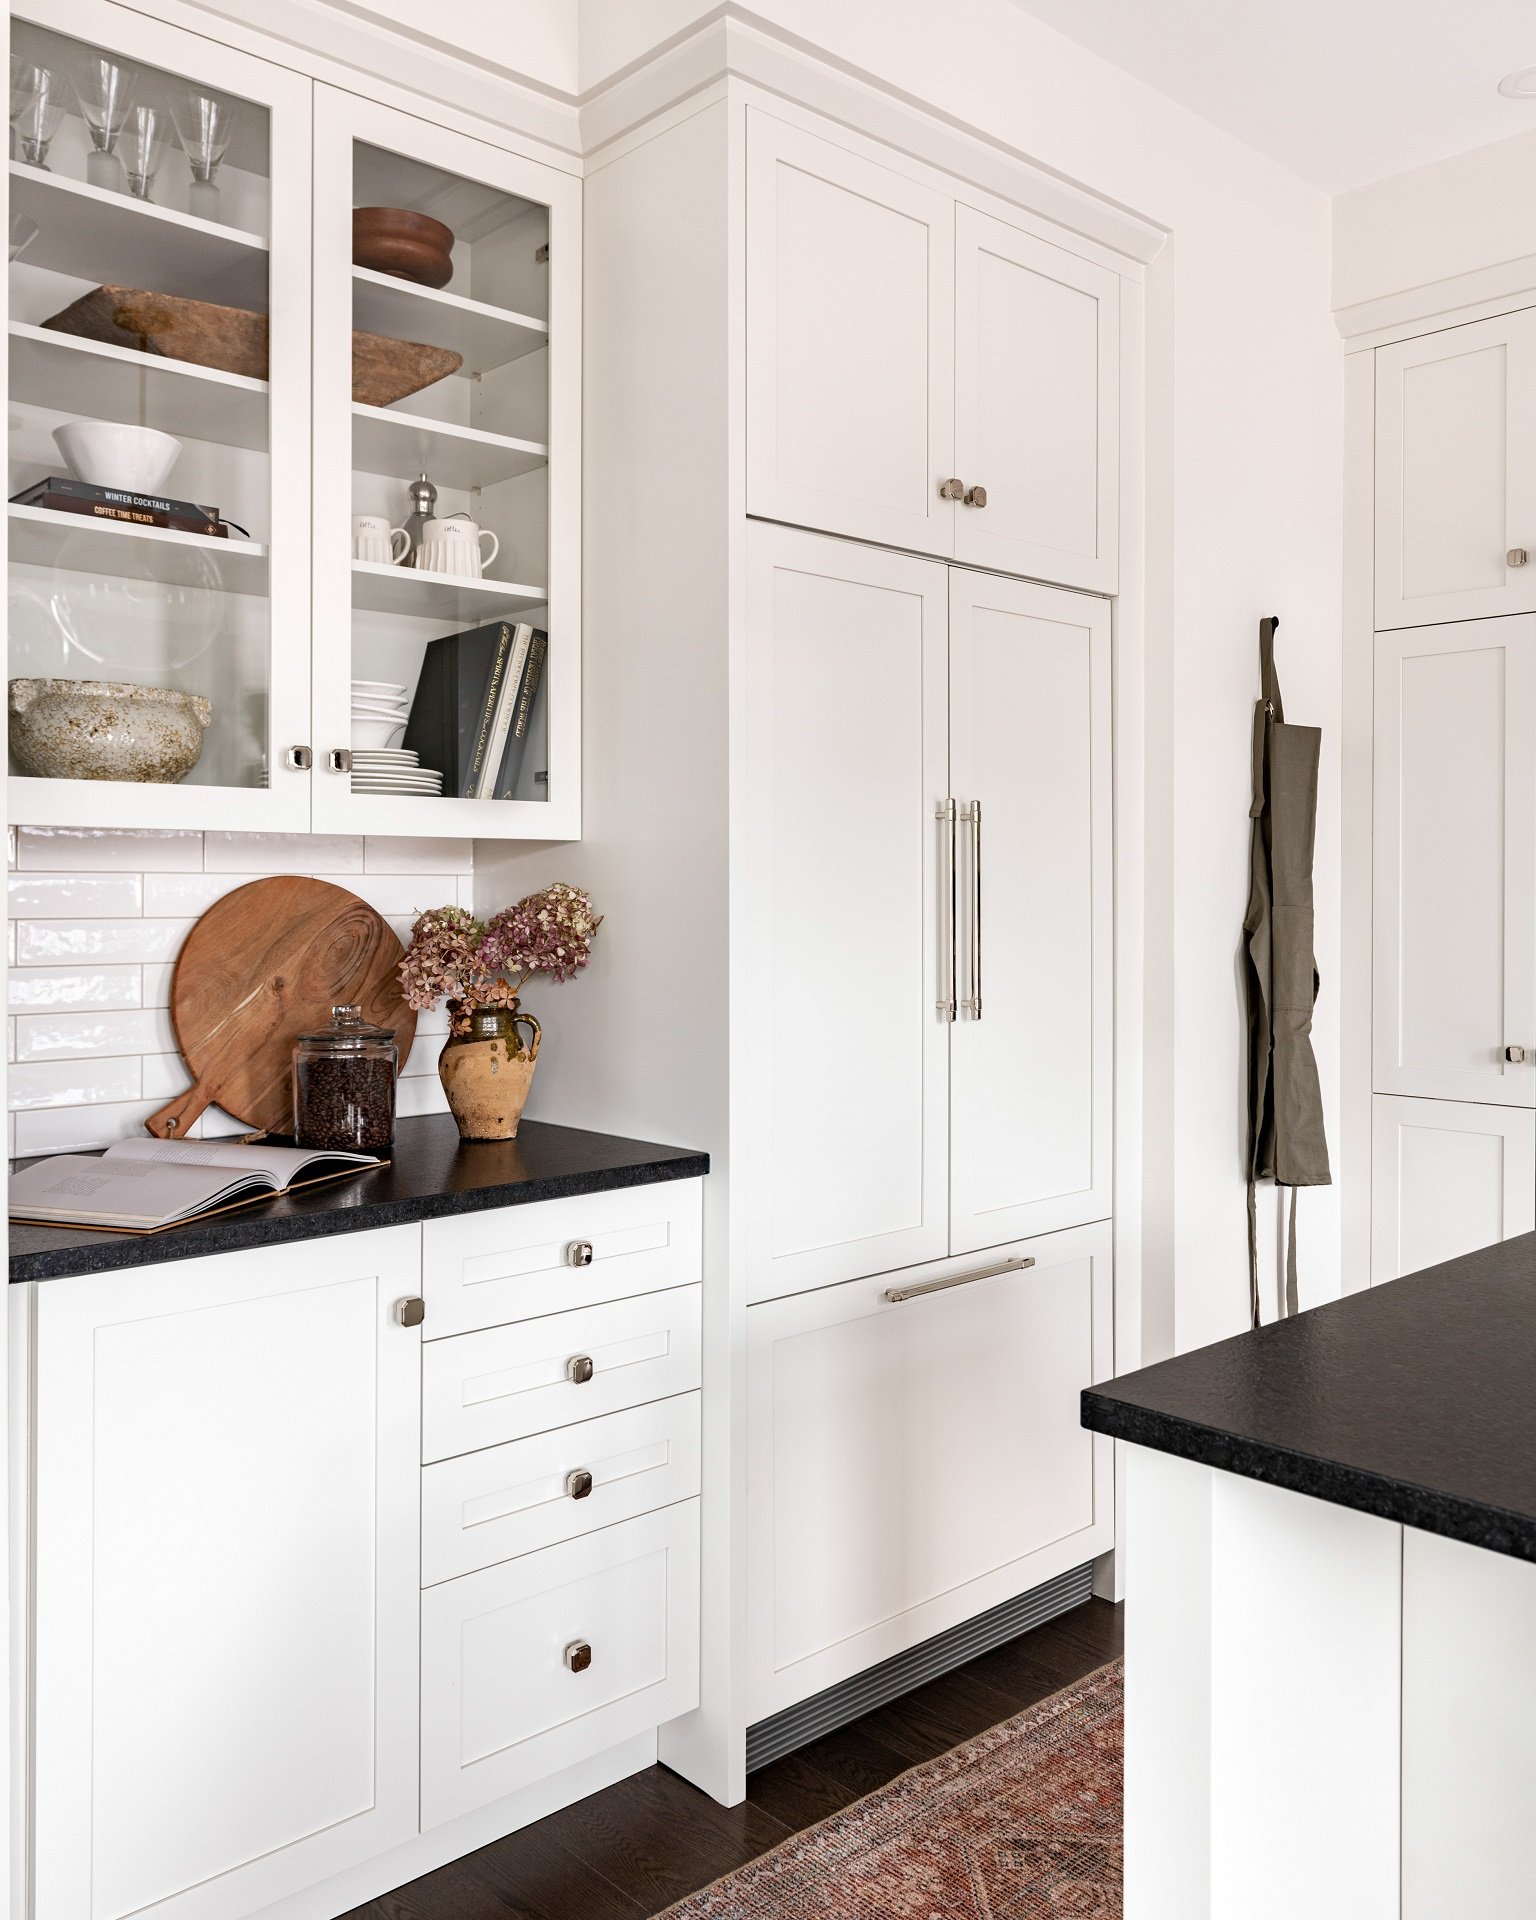 White glass cabinets with white interior shelving